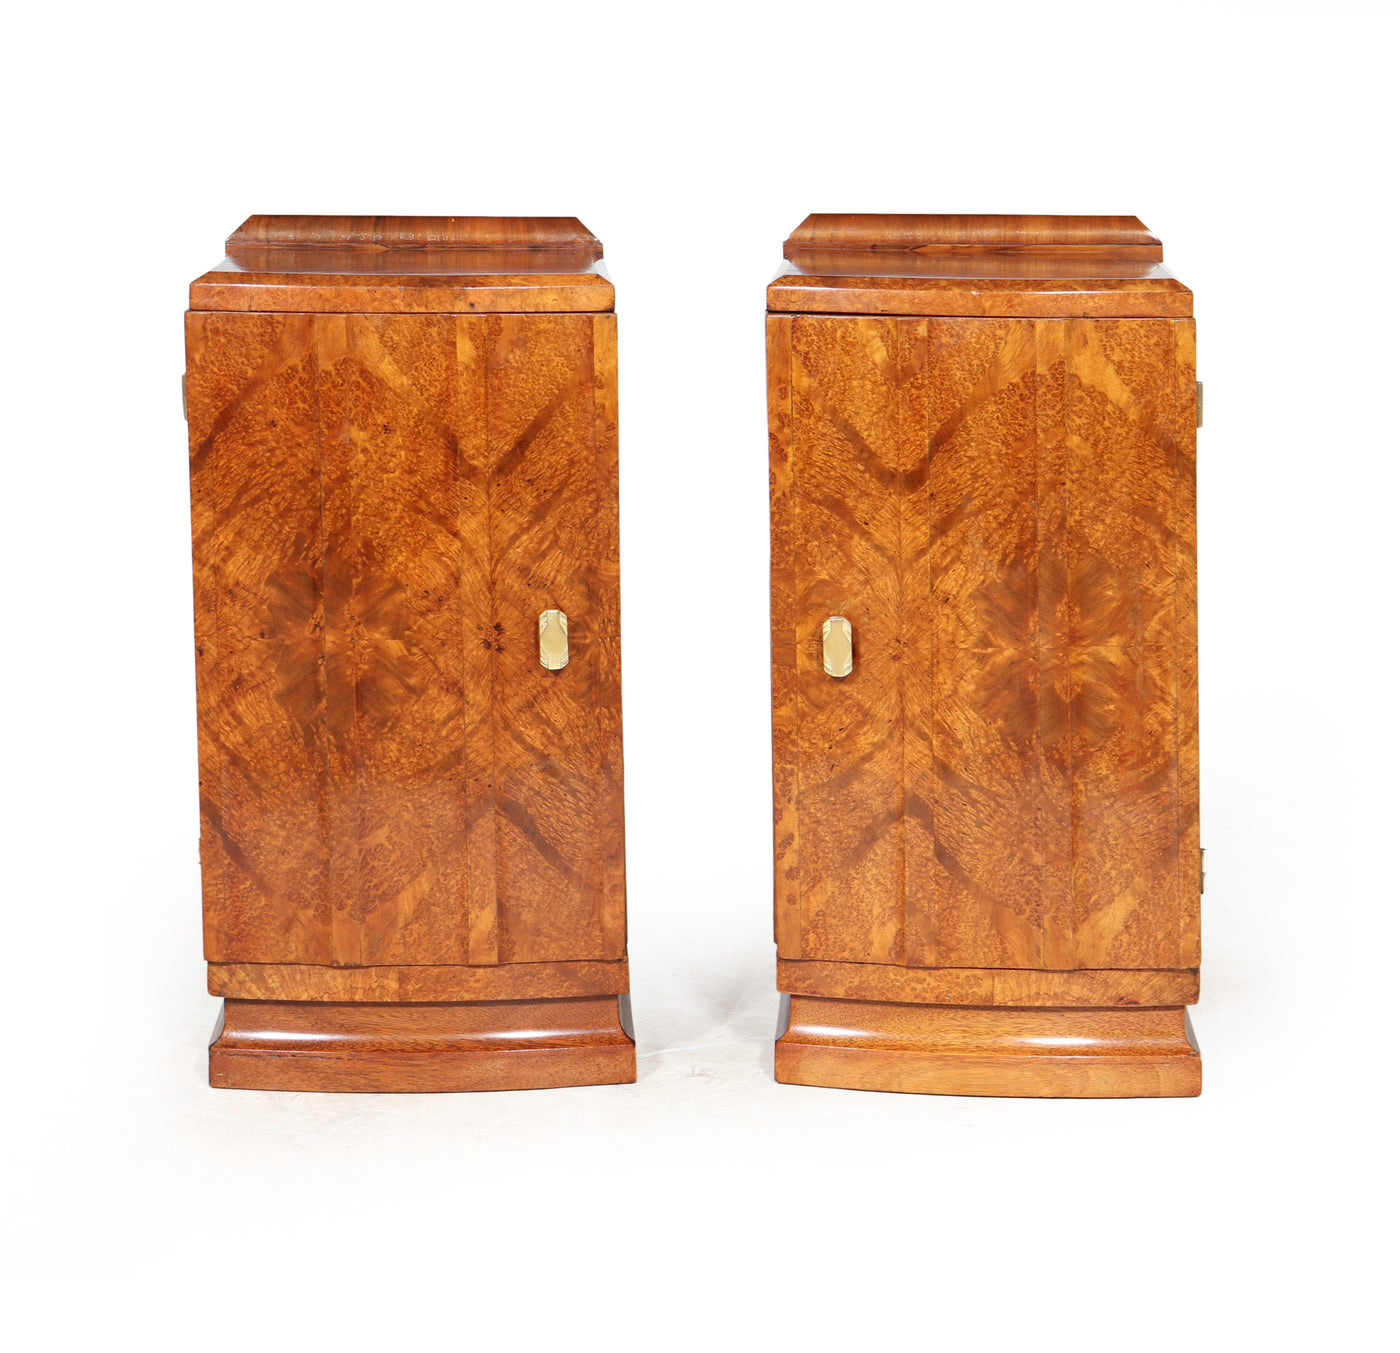 Pair of French Art Deco Bedside Cabinets in Amboyna